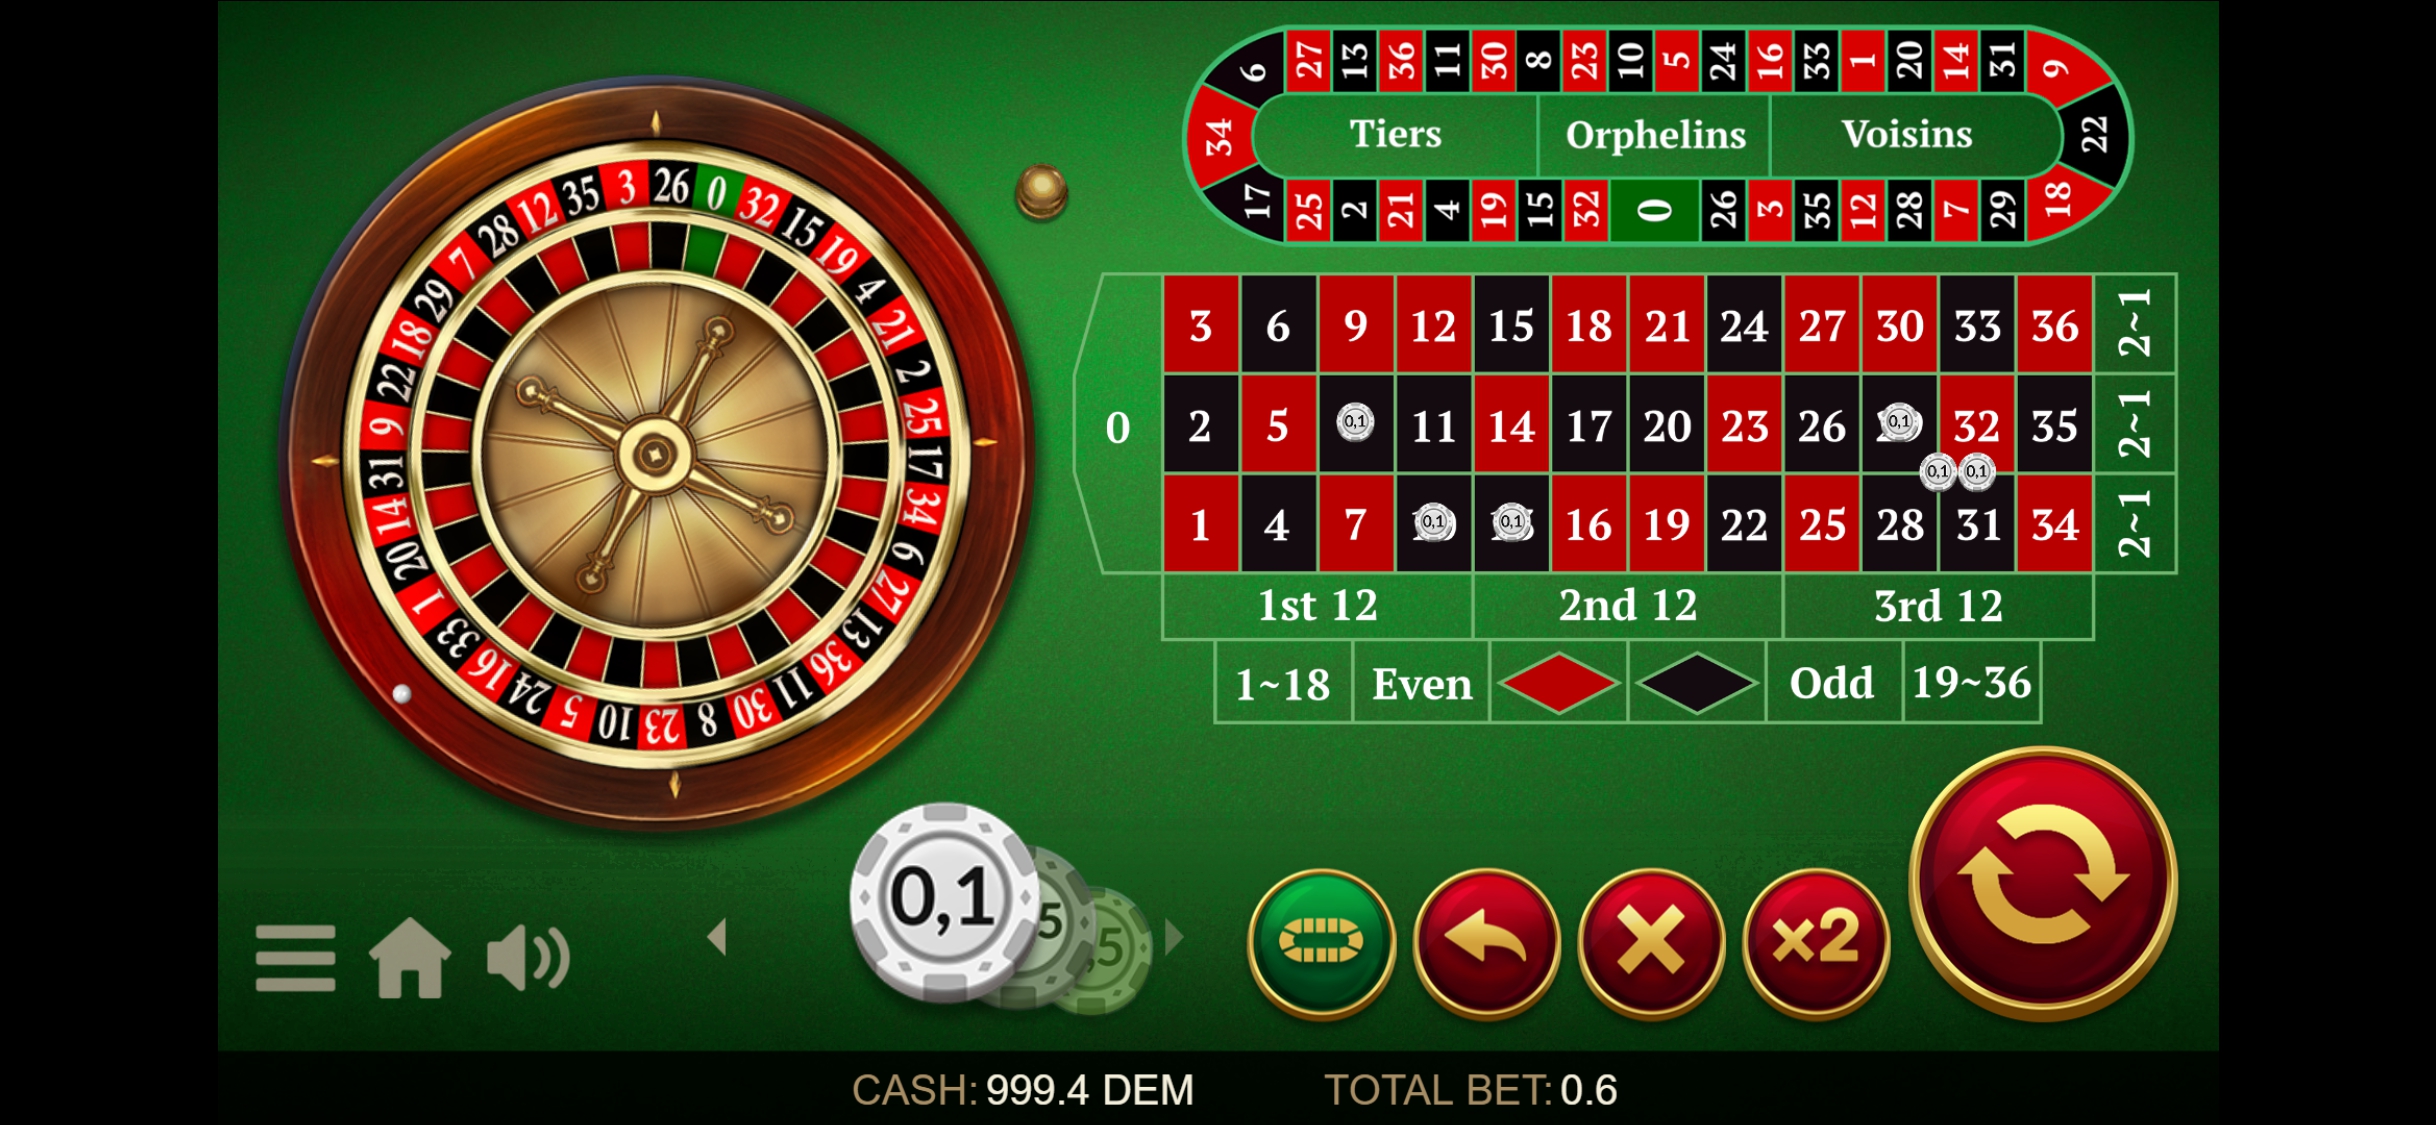 BetSwagger Mobile Casino Games Review